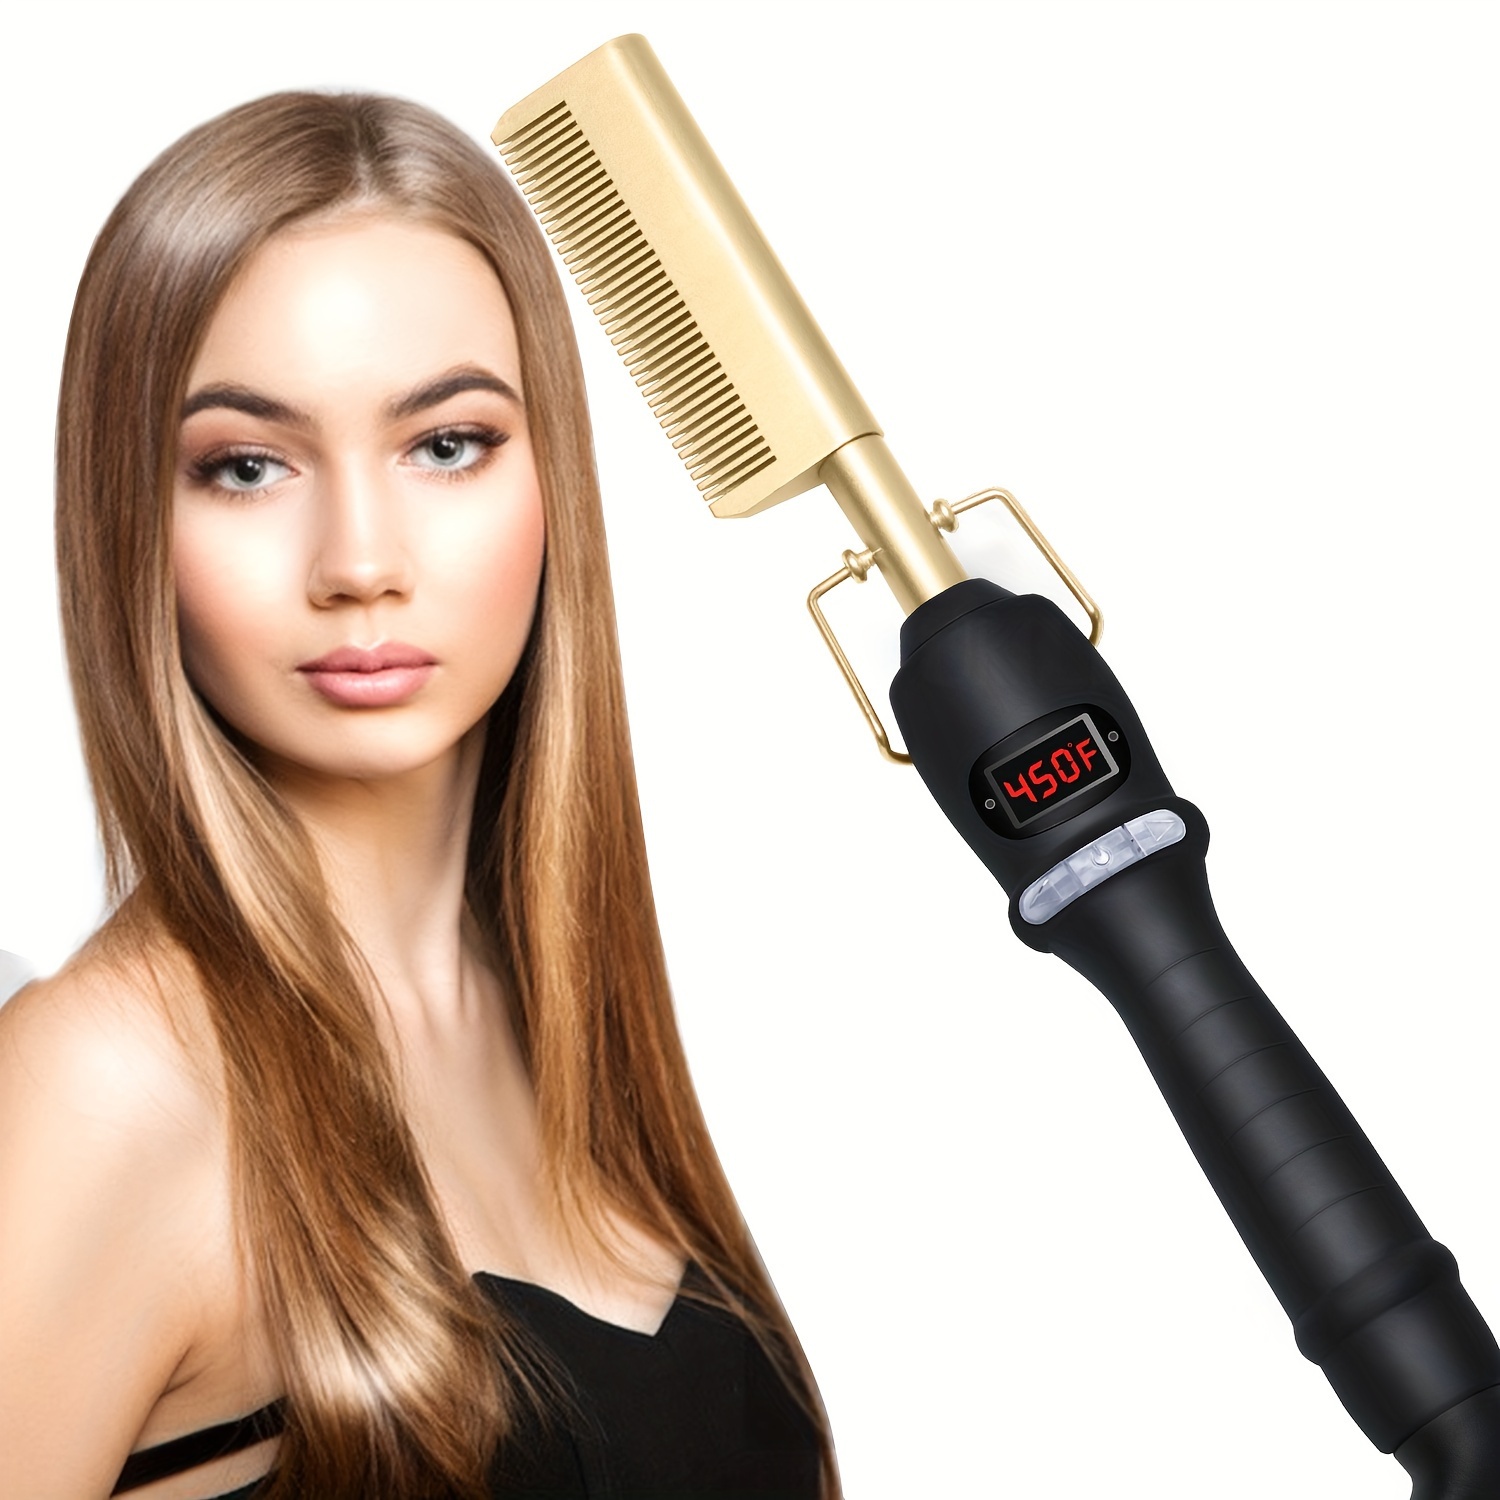 

Hot Comb Electric Digital Display Hot Comb Professional High Heat Ceramic Hair Press Comb Multifunctional Copper Hair Straightener For Thick Hair